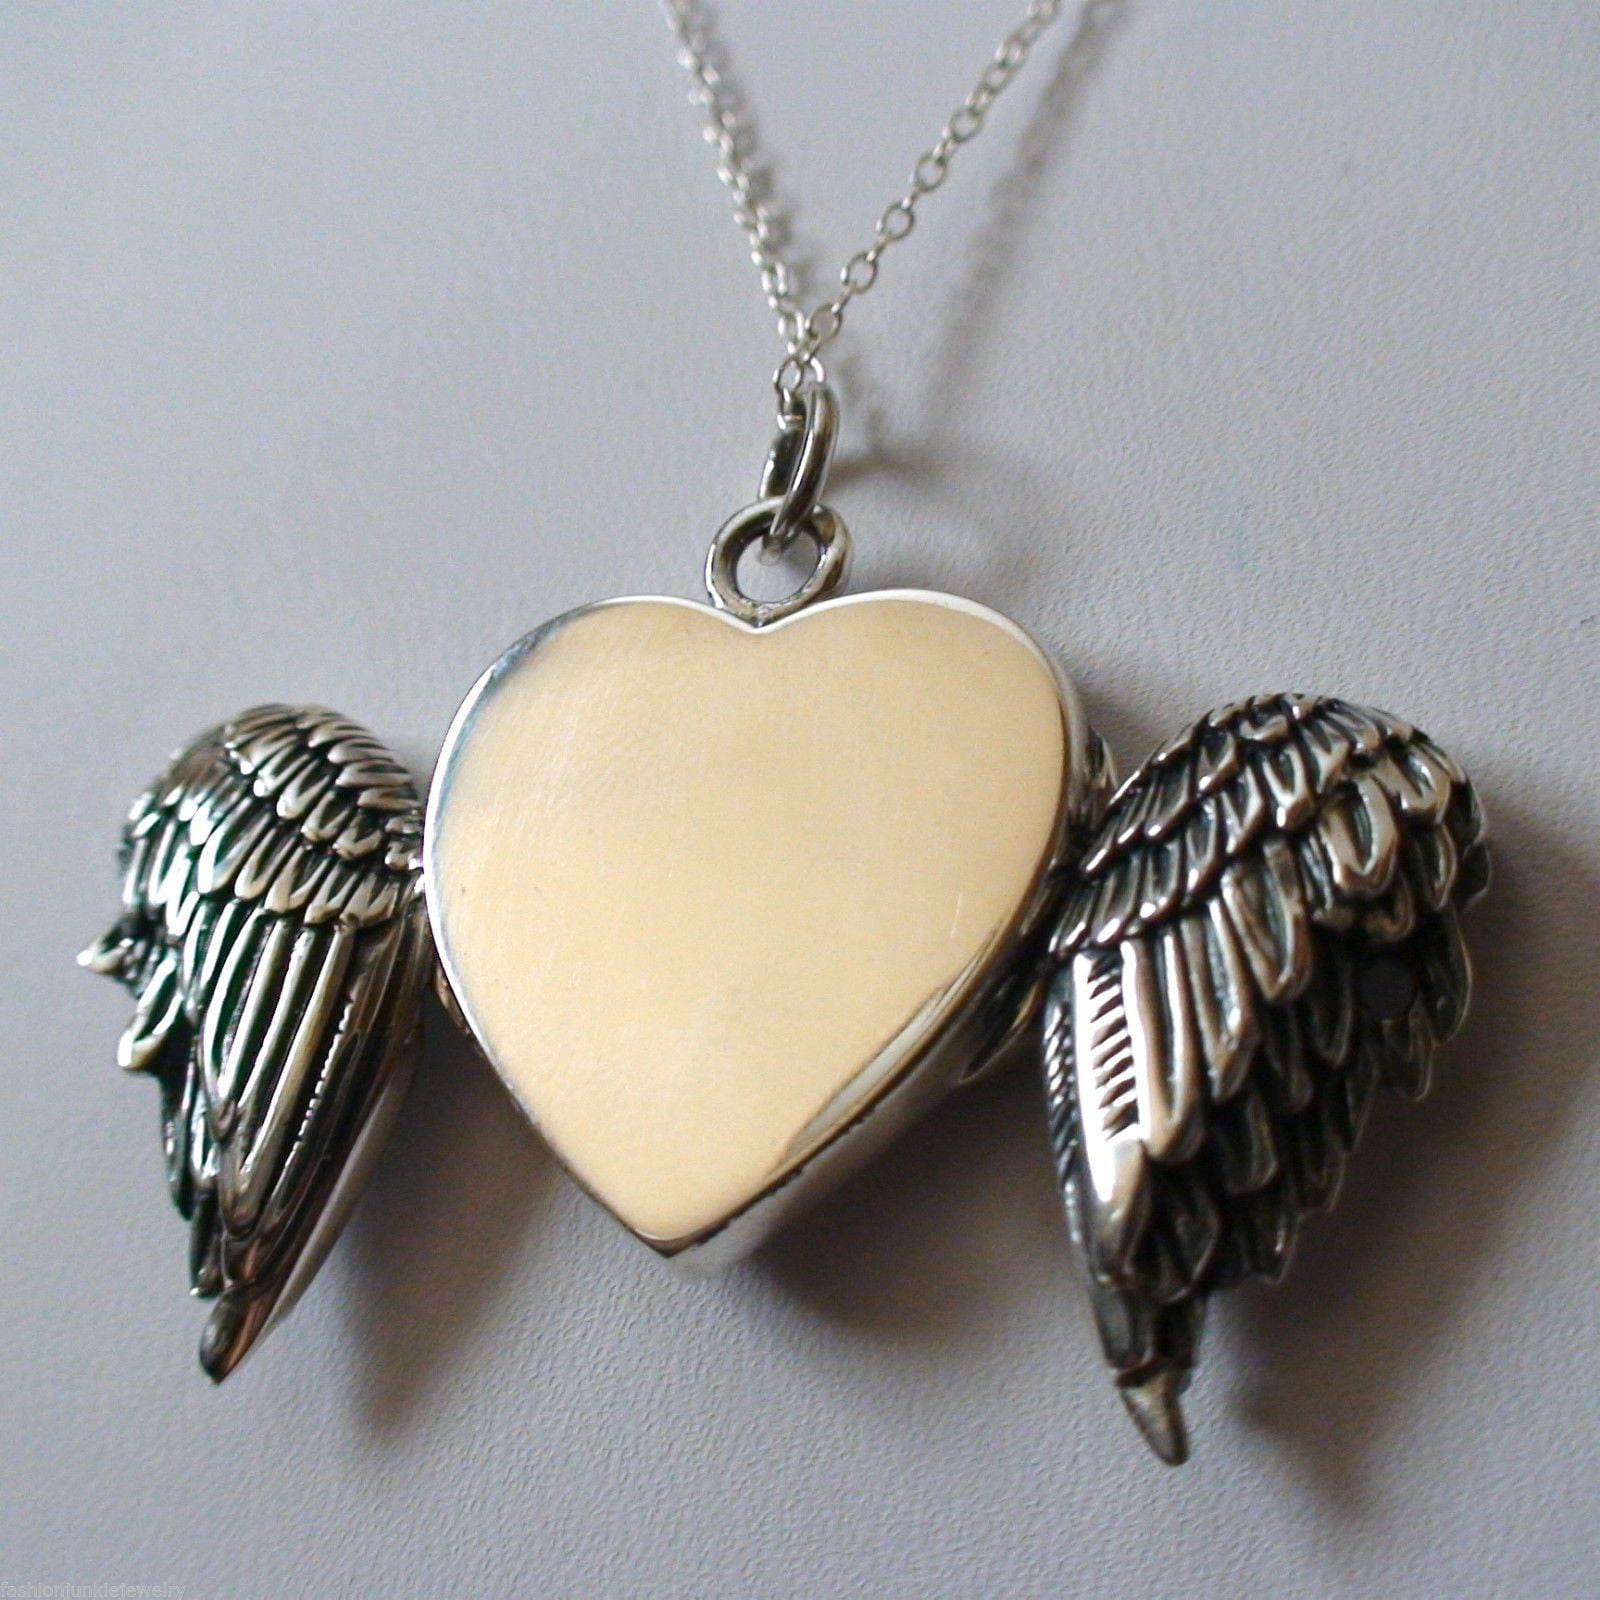 Personalized Angel Wing Heart Locket Necklace That Hold Pictures Photo Heart Shape Locket Gift for Girl Women